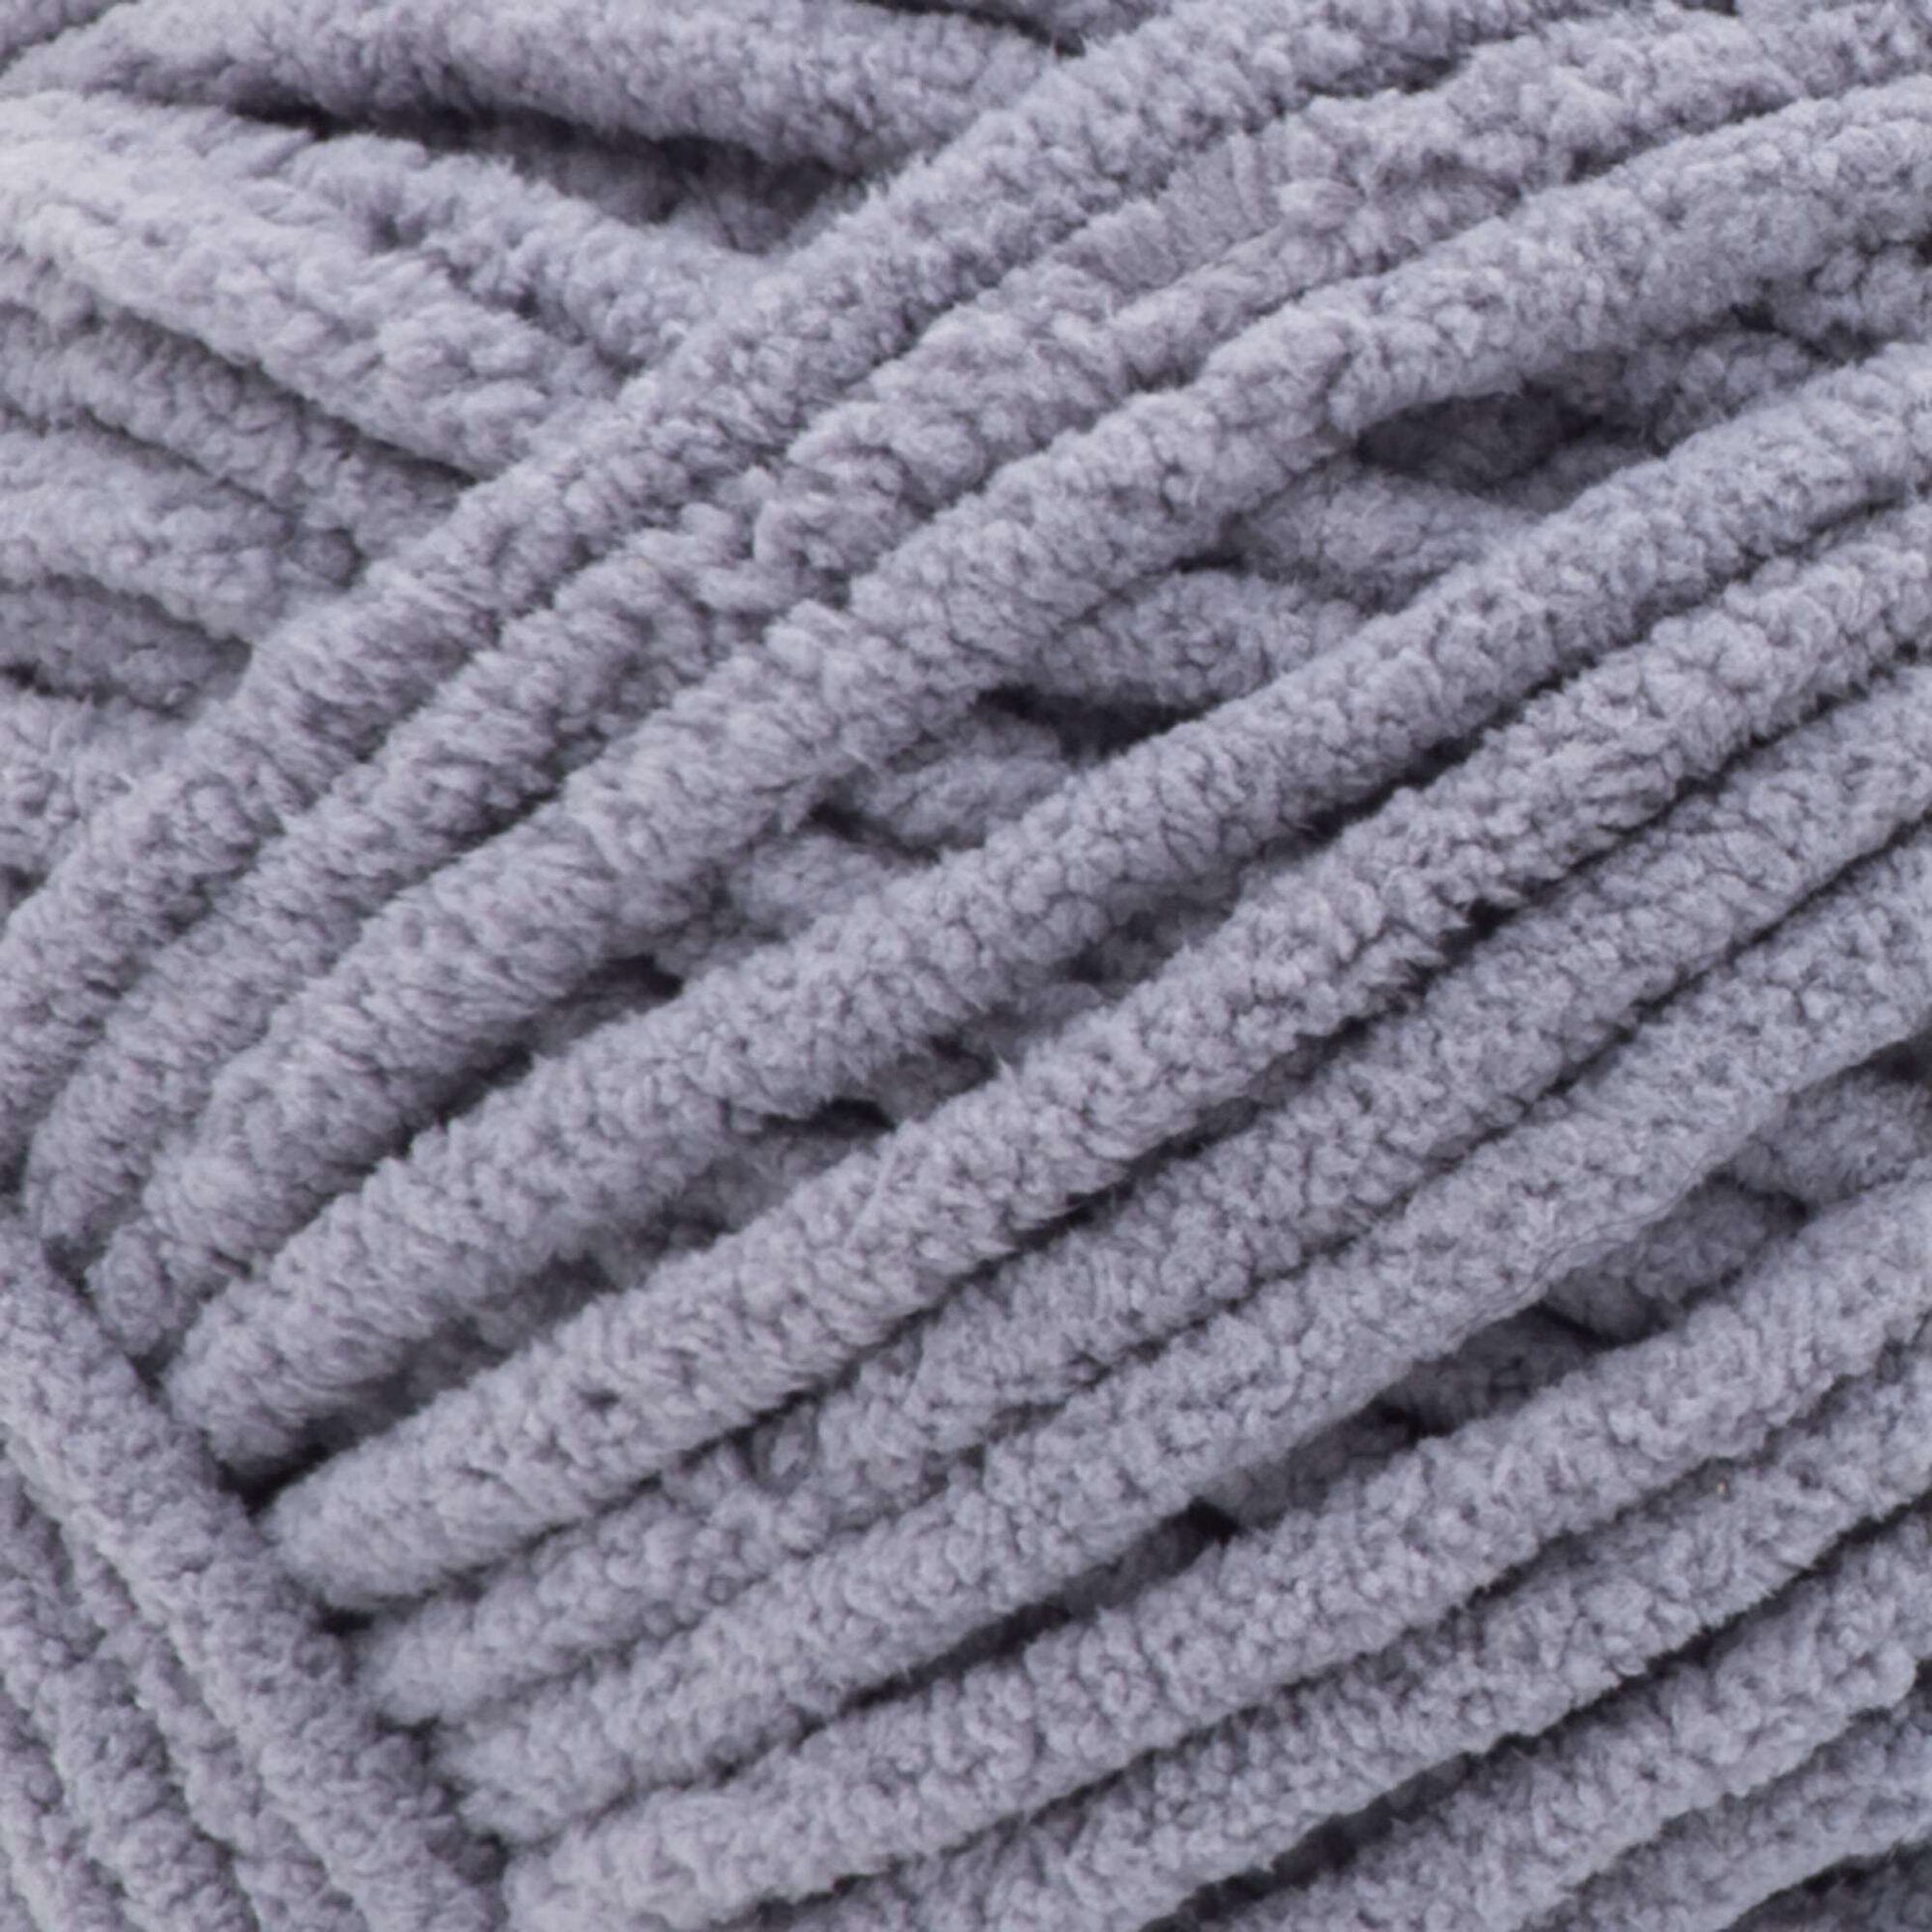 Blankets Winnipeg, MB., Canada: Baby's Blanket, Afghan Crochet – Buy  Crocheted Blankets Online, Made With Bernat Yarn, Delivery and Shipping in  Canada and USA